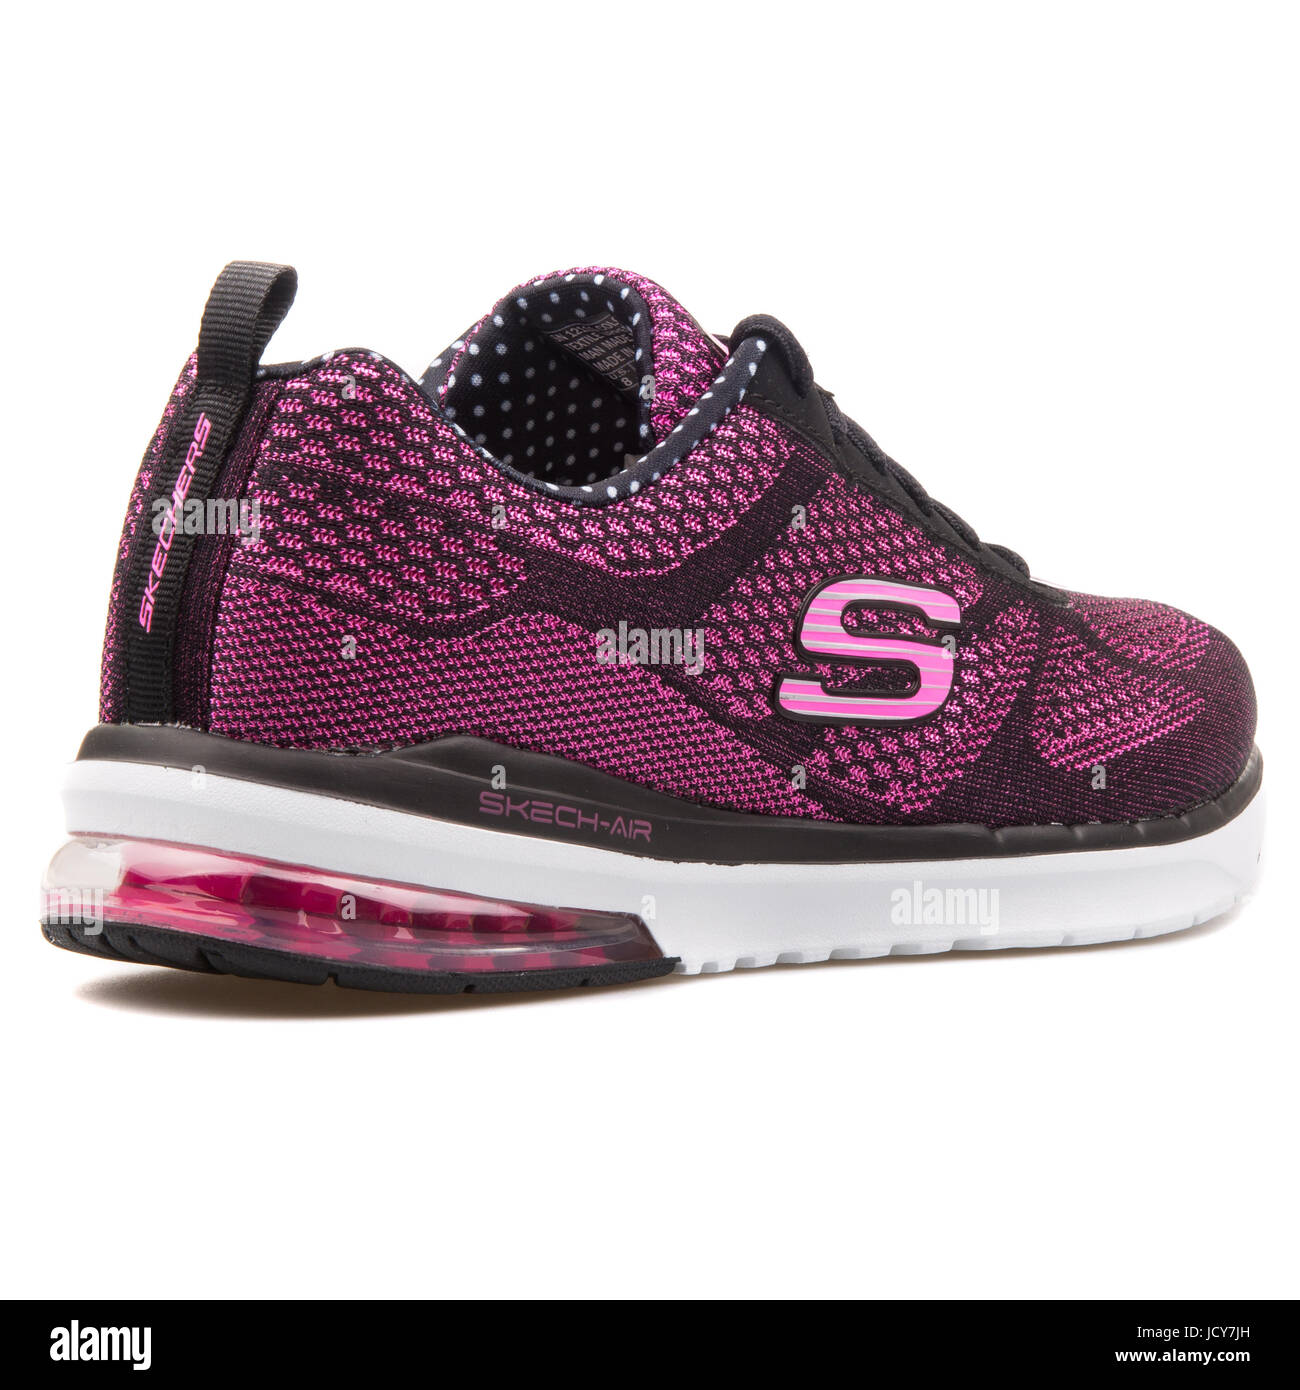 Skechers Skech-Air Infinity Black and Hot Pink Women's Running Shoes -  12111-BKHP Stock Photo - Alamy